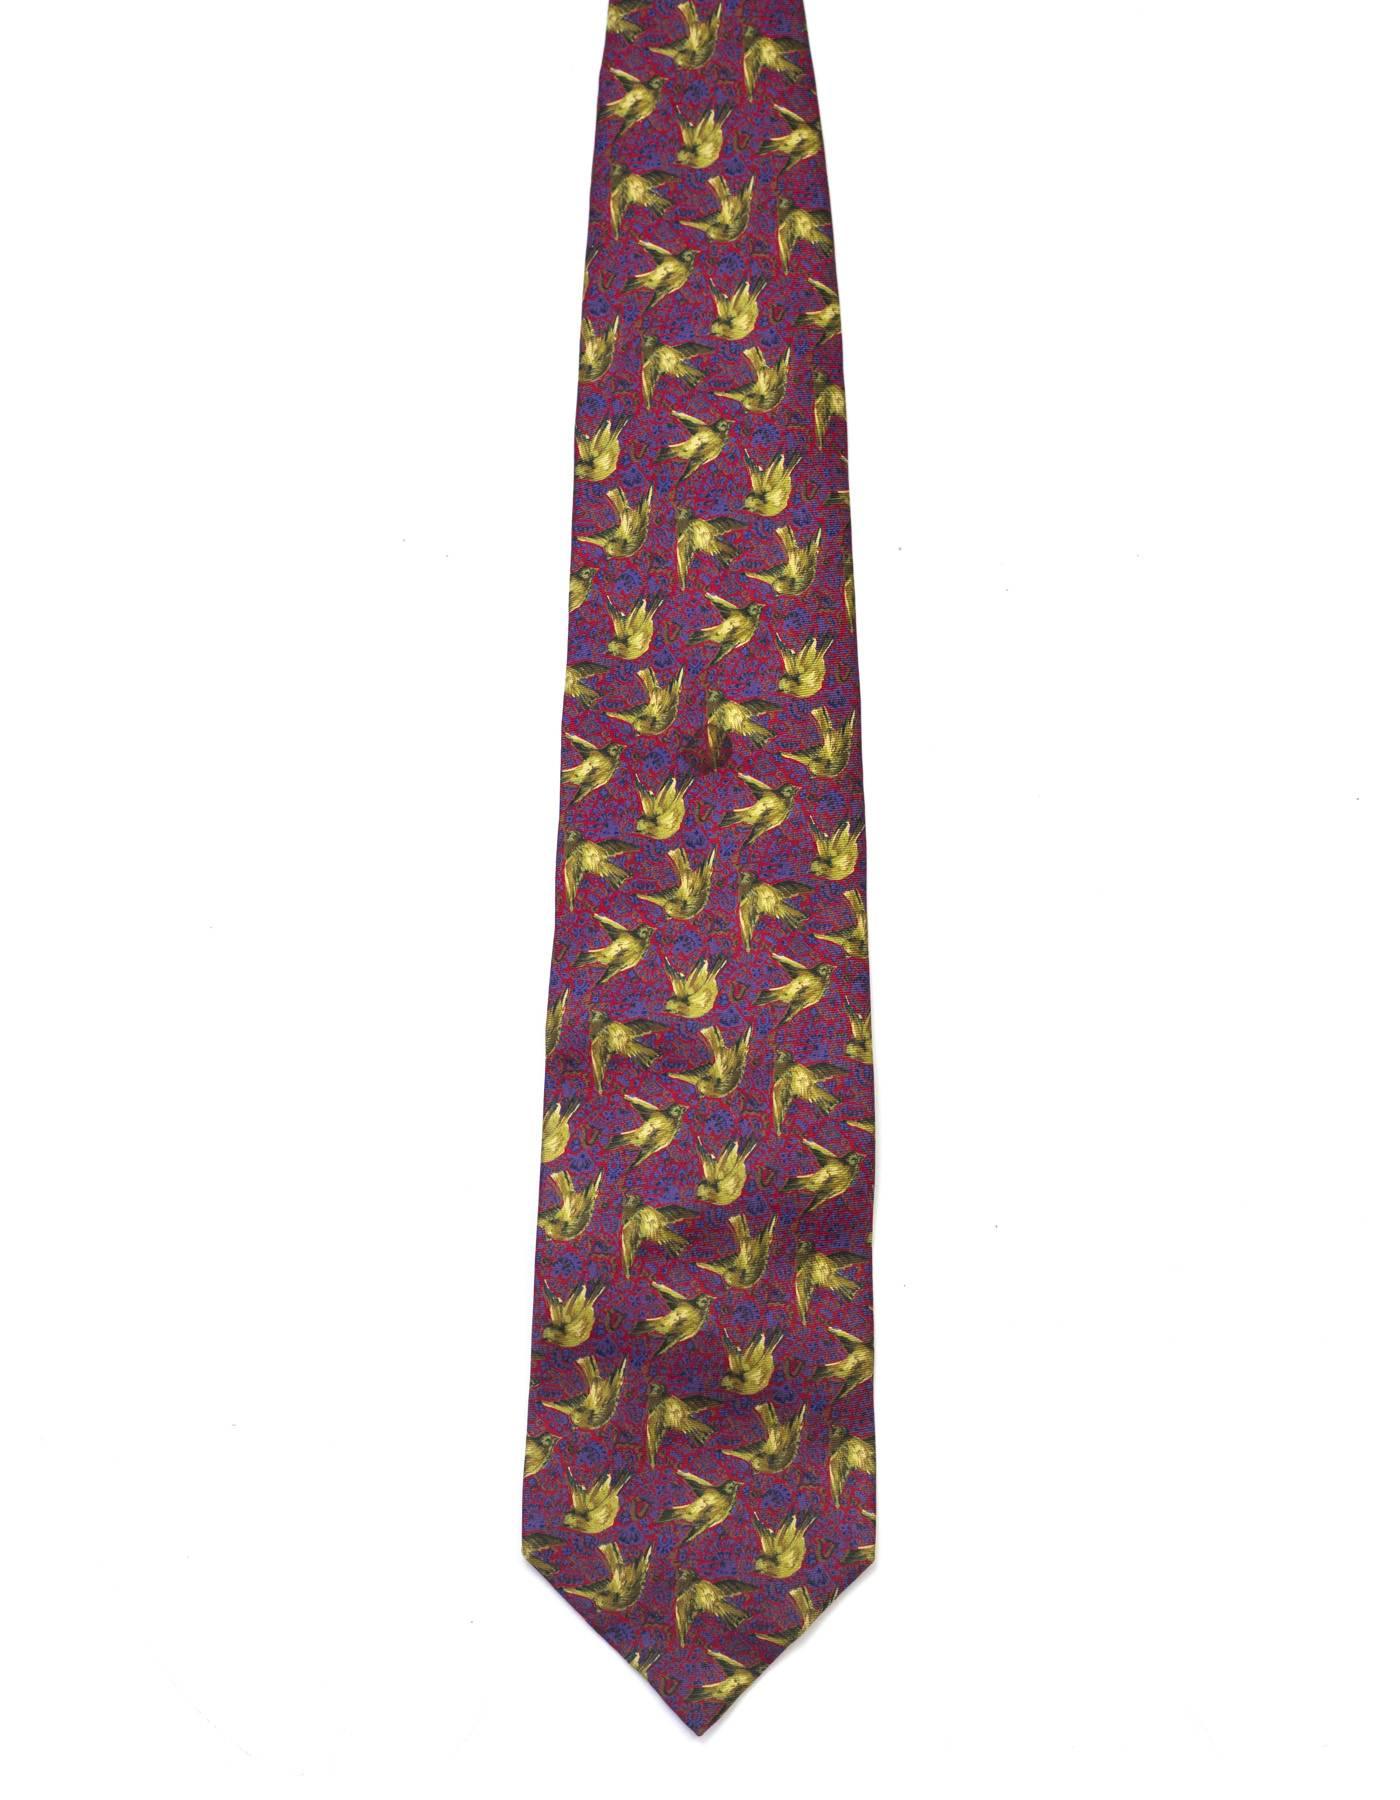 Bottega Veneta Bird Print Silk Tie
Features red and blue speckled background with yellow birds printed throughout

Made In: Italy
Color: Red, blue and yellow
Composition: 100% silk
Overall Condition: Excellent pre-owned condition with the exception